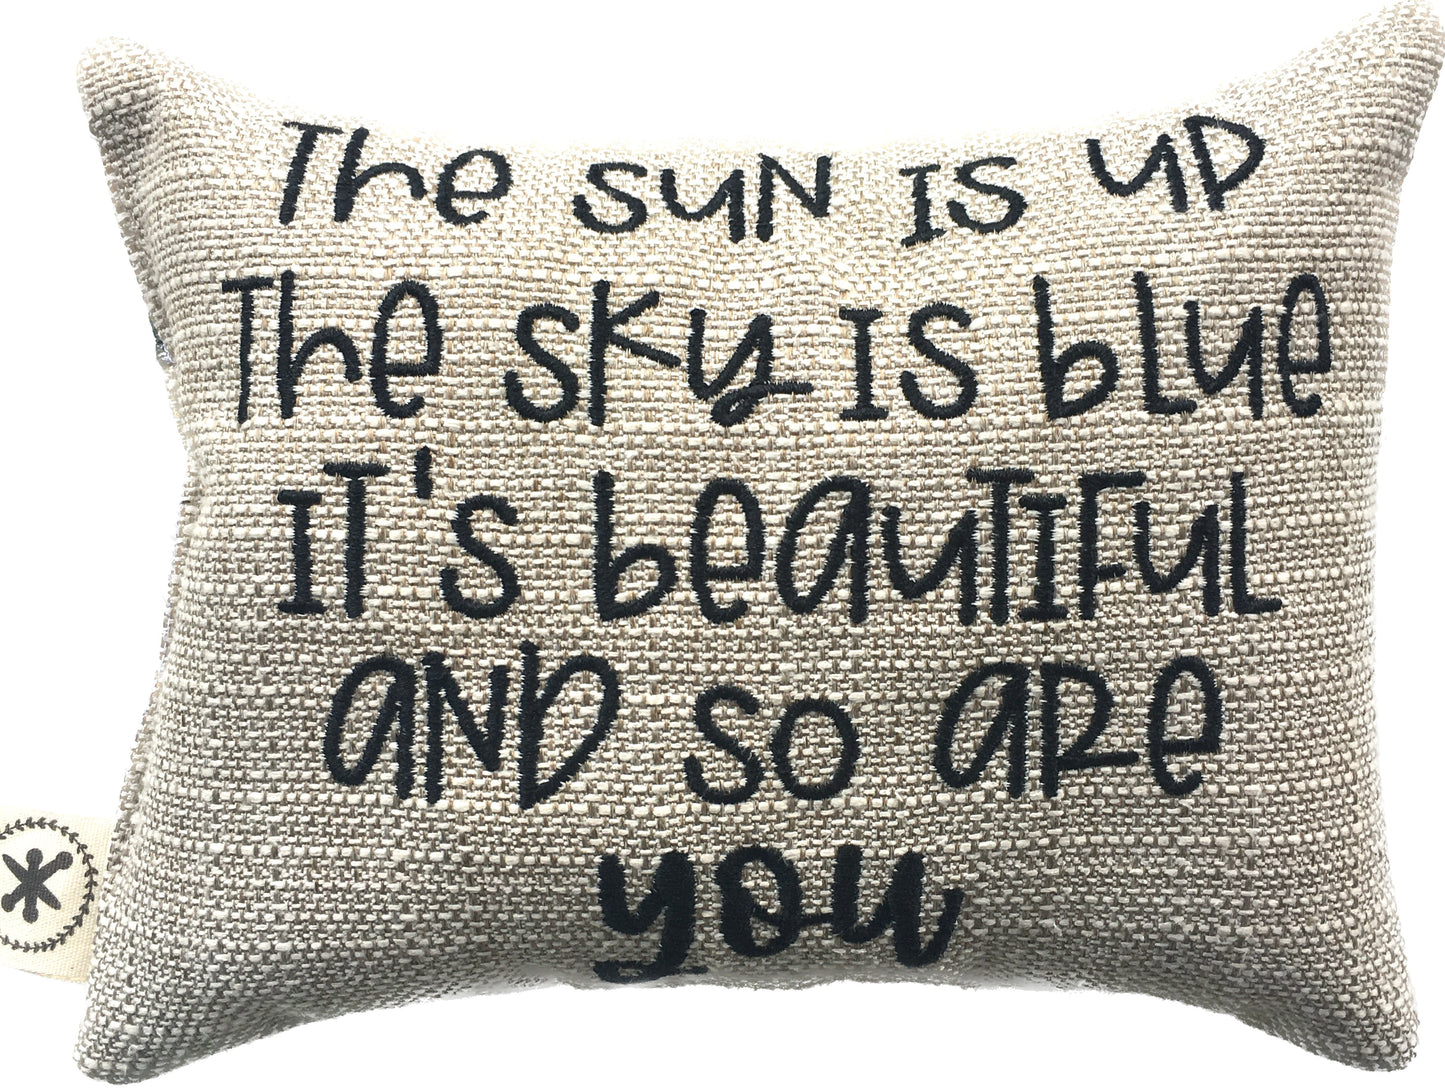 The Sun Is Up, The Sly is Blue, It's Beautiful and So Are You_ Message Pillow